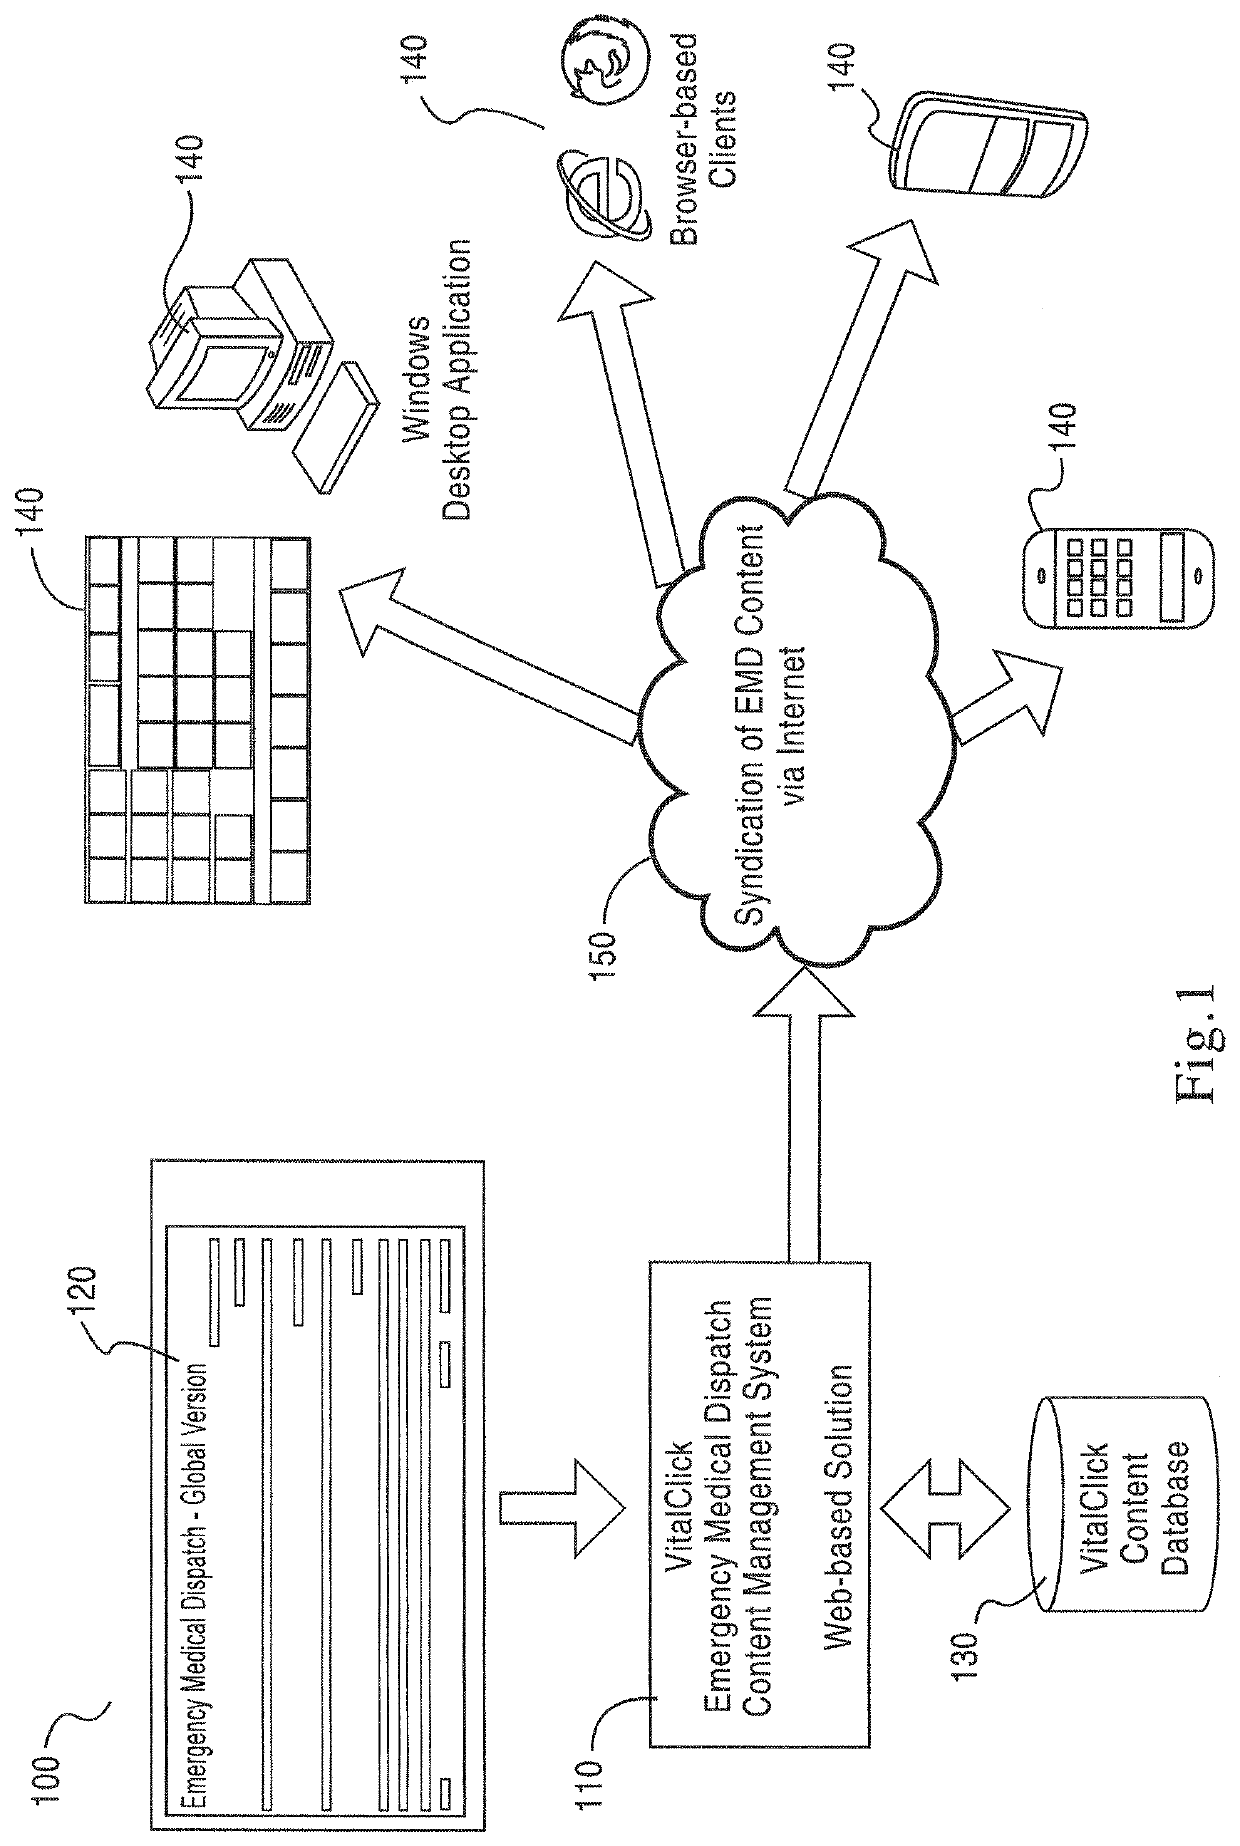 Automated incident response method and system